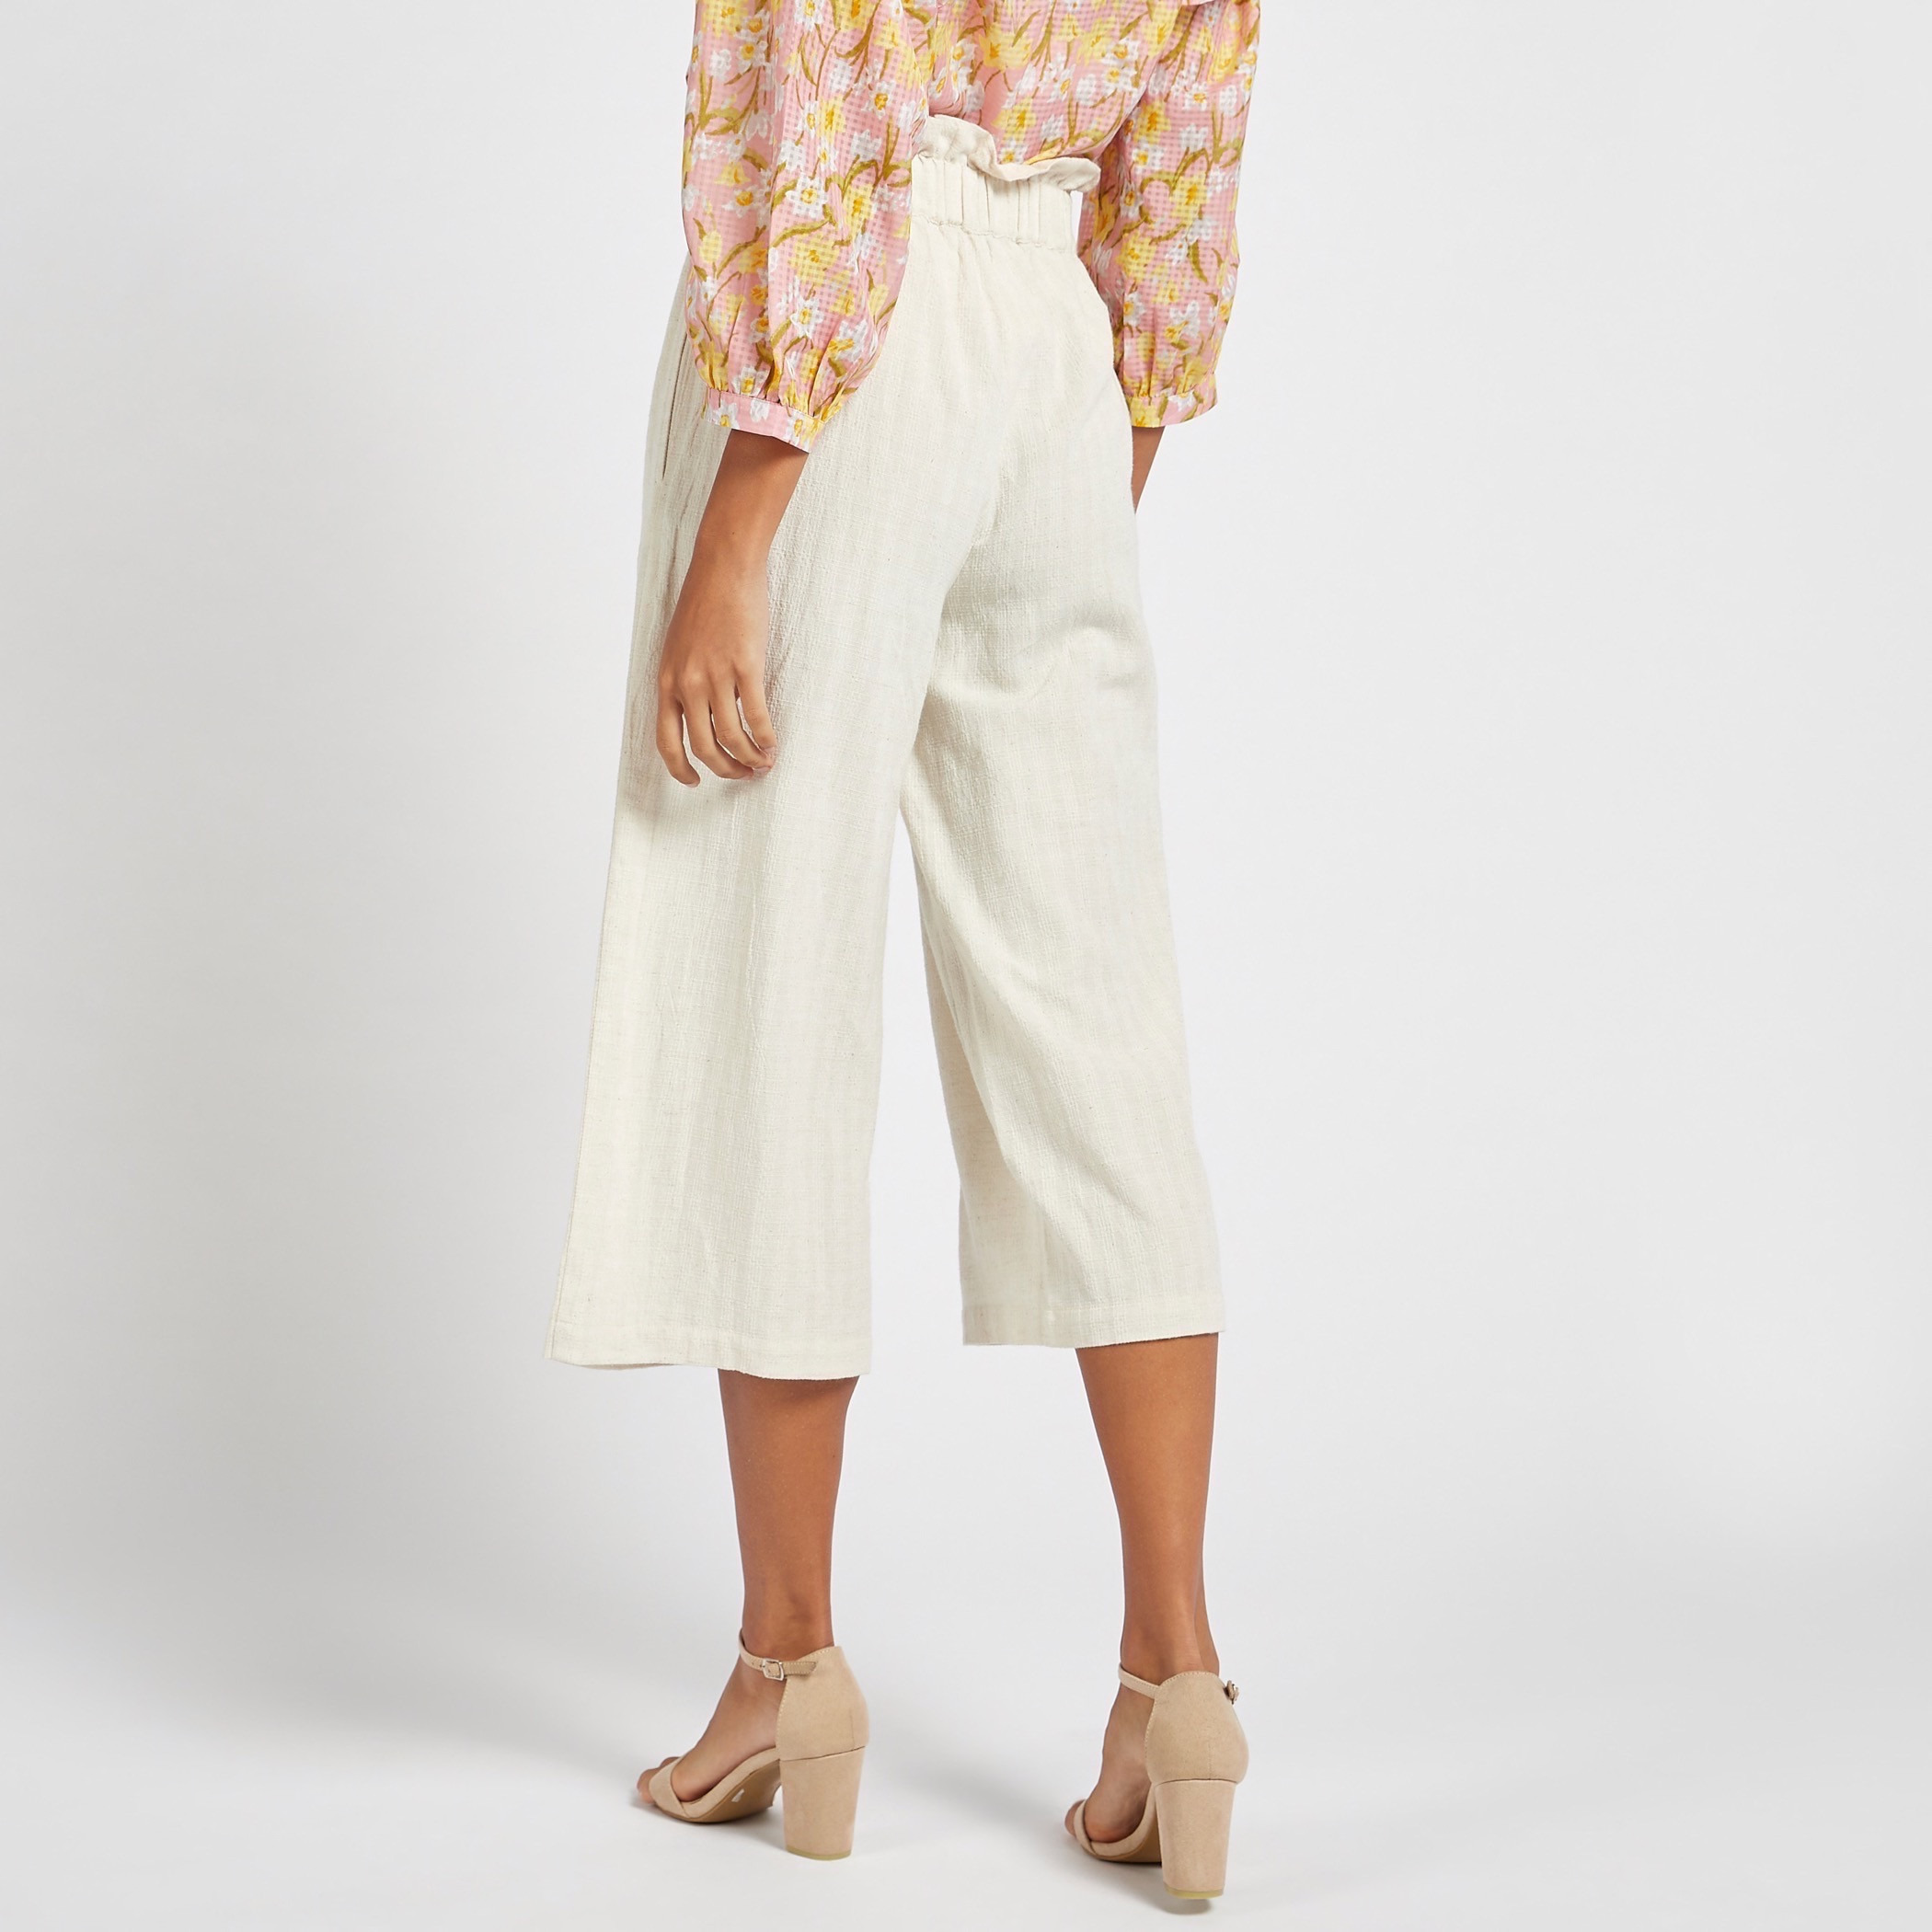 Shop Dobby Striped Regular Fit Culottes with Paper Bag Waist